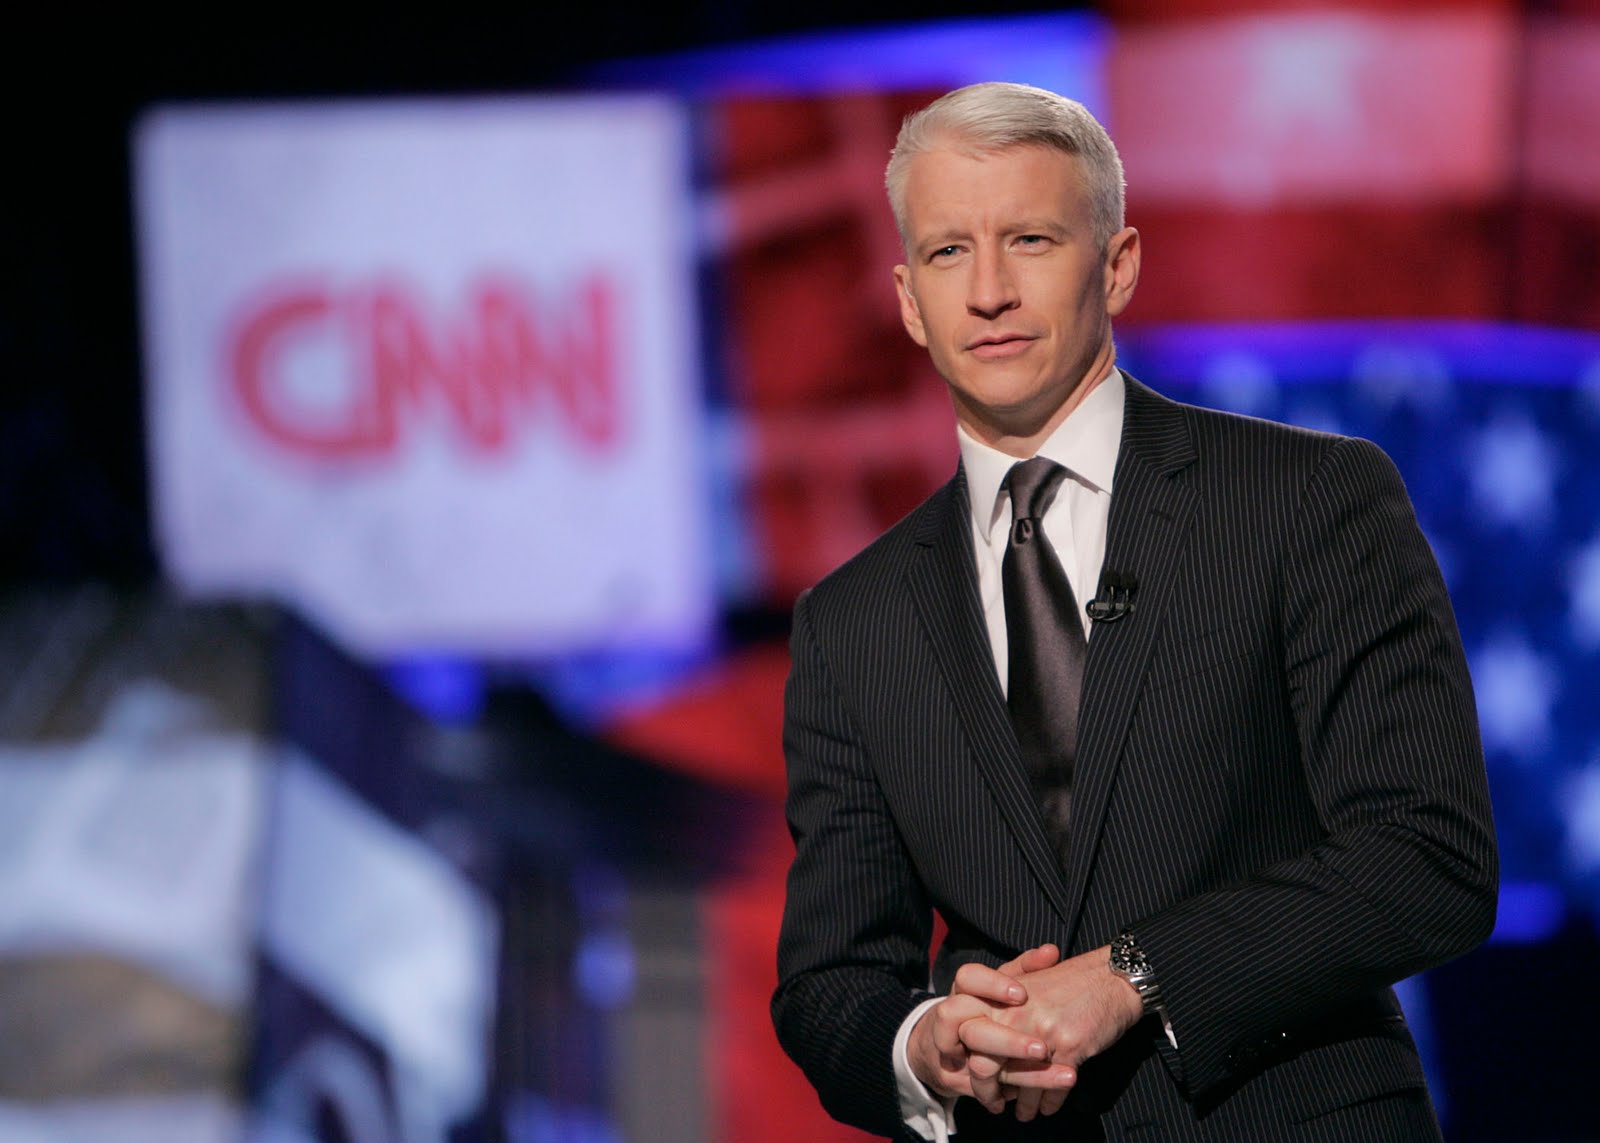 Anderson Cooper 360° Host Signs Long Term Contract with CNN canceled